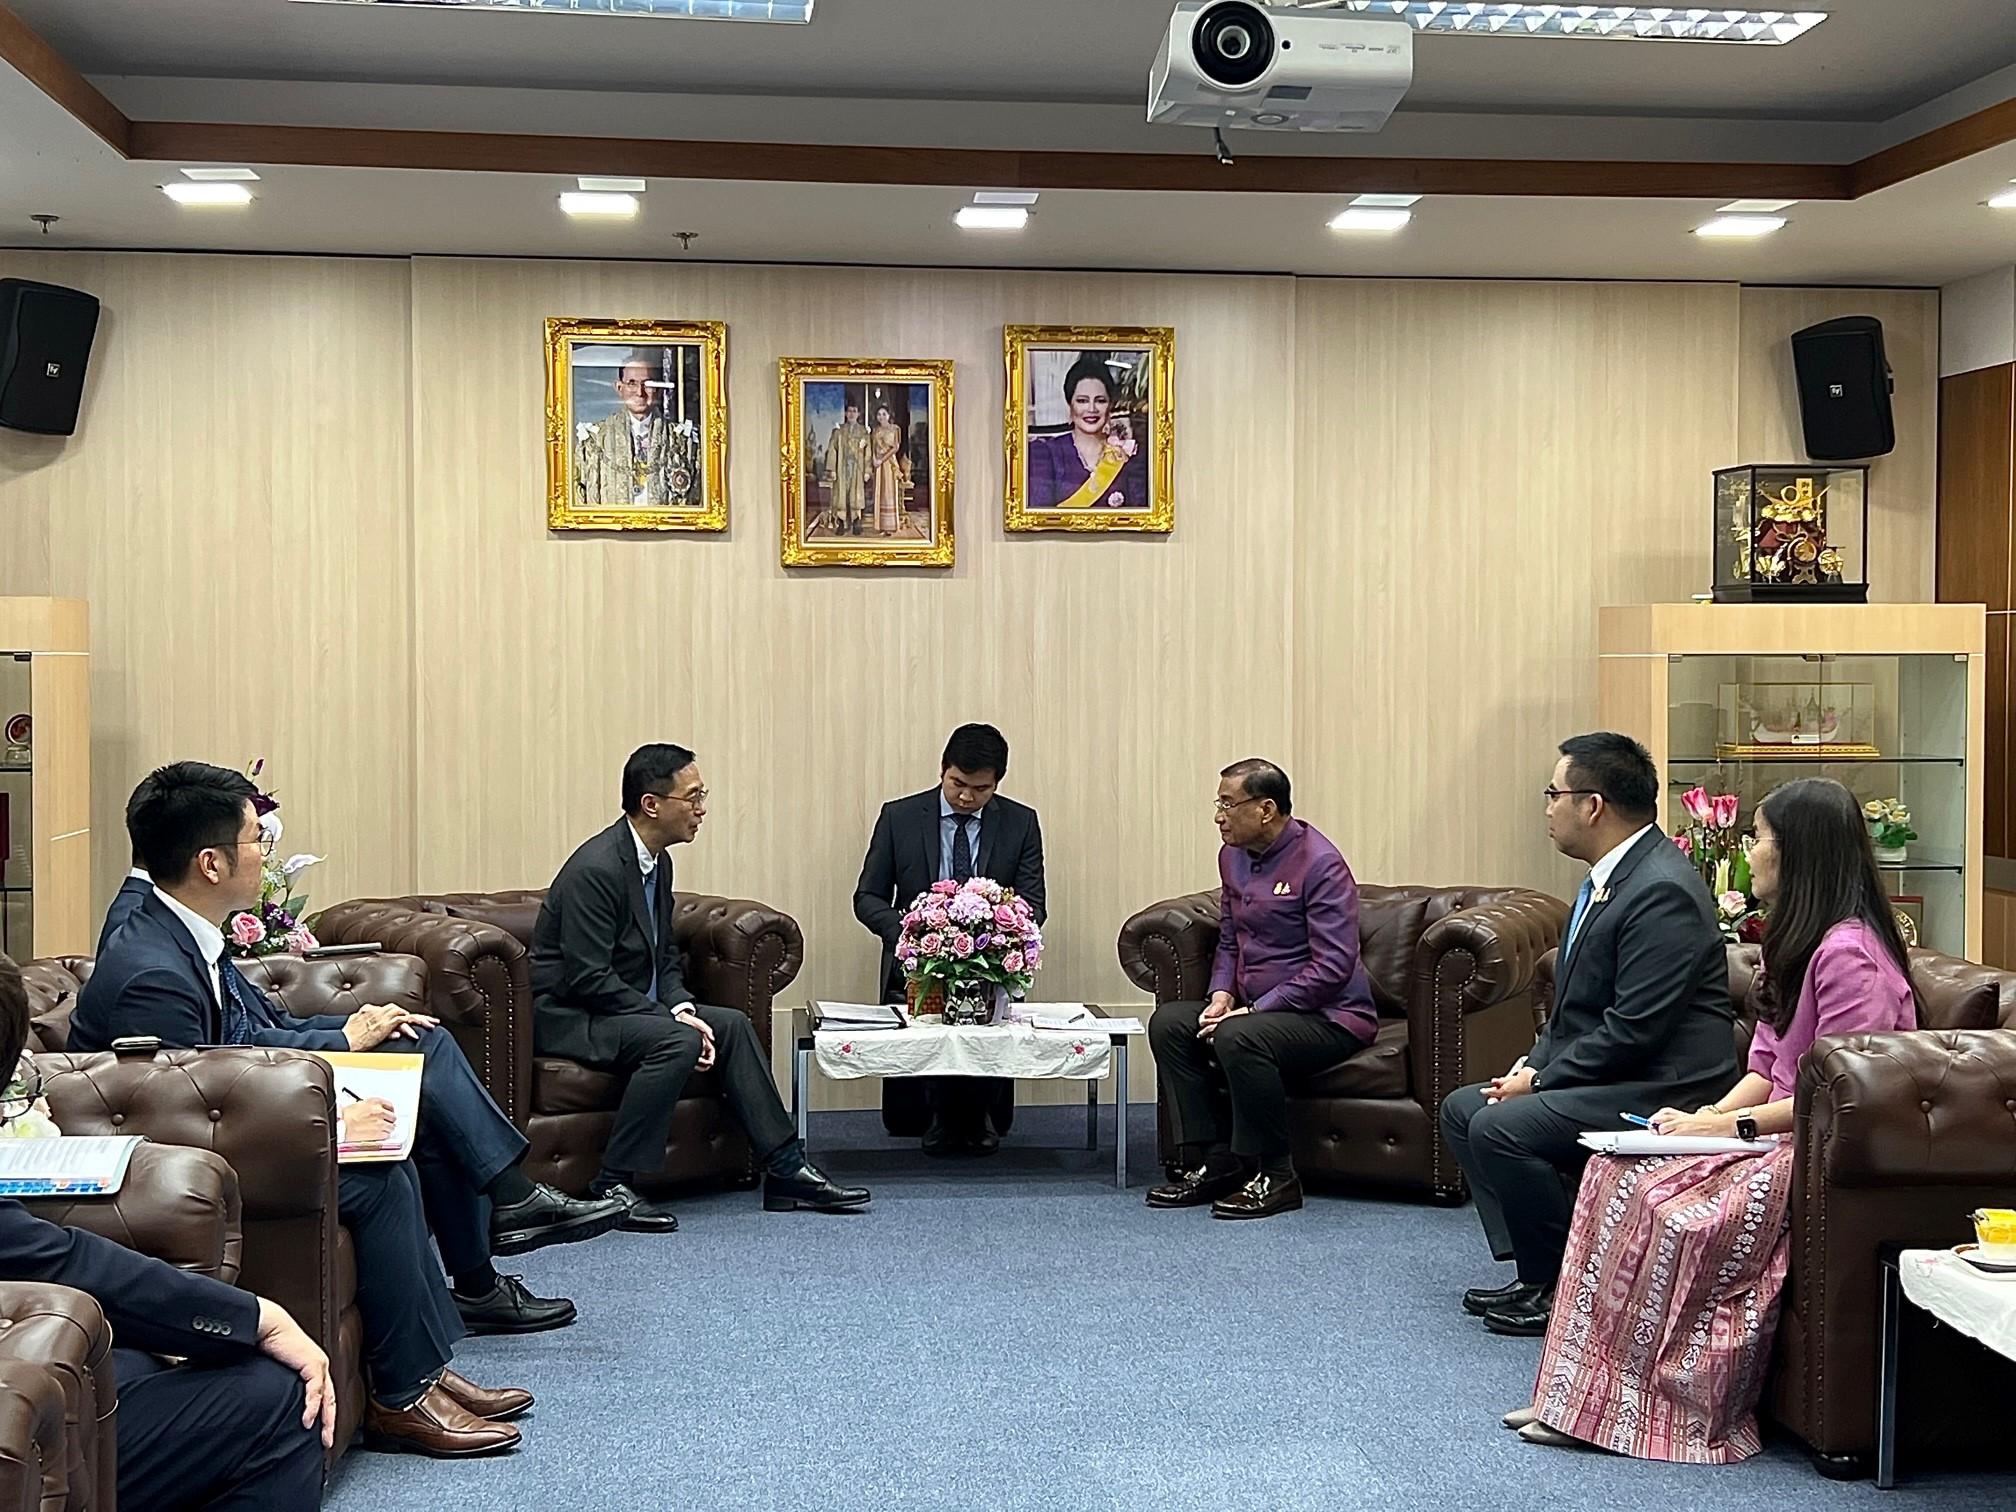 The Secretary for Culture, Sports and Tourism, Mr Kevin Yeung (second left), met with the Minister of Culture of Thailand, Mr Sermsak Pongpanit (third right), in Bangkok this afternoon (October 20) to explore collaboration opportunities and enhance mutual links.